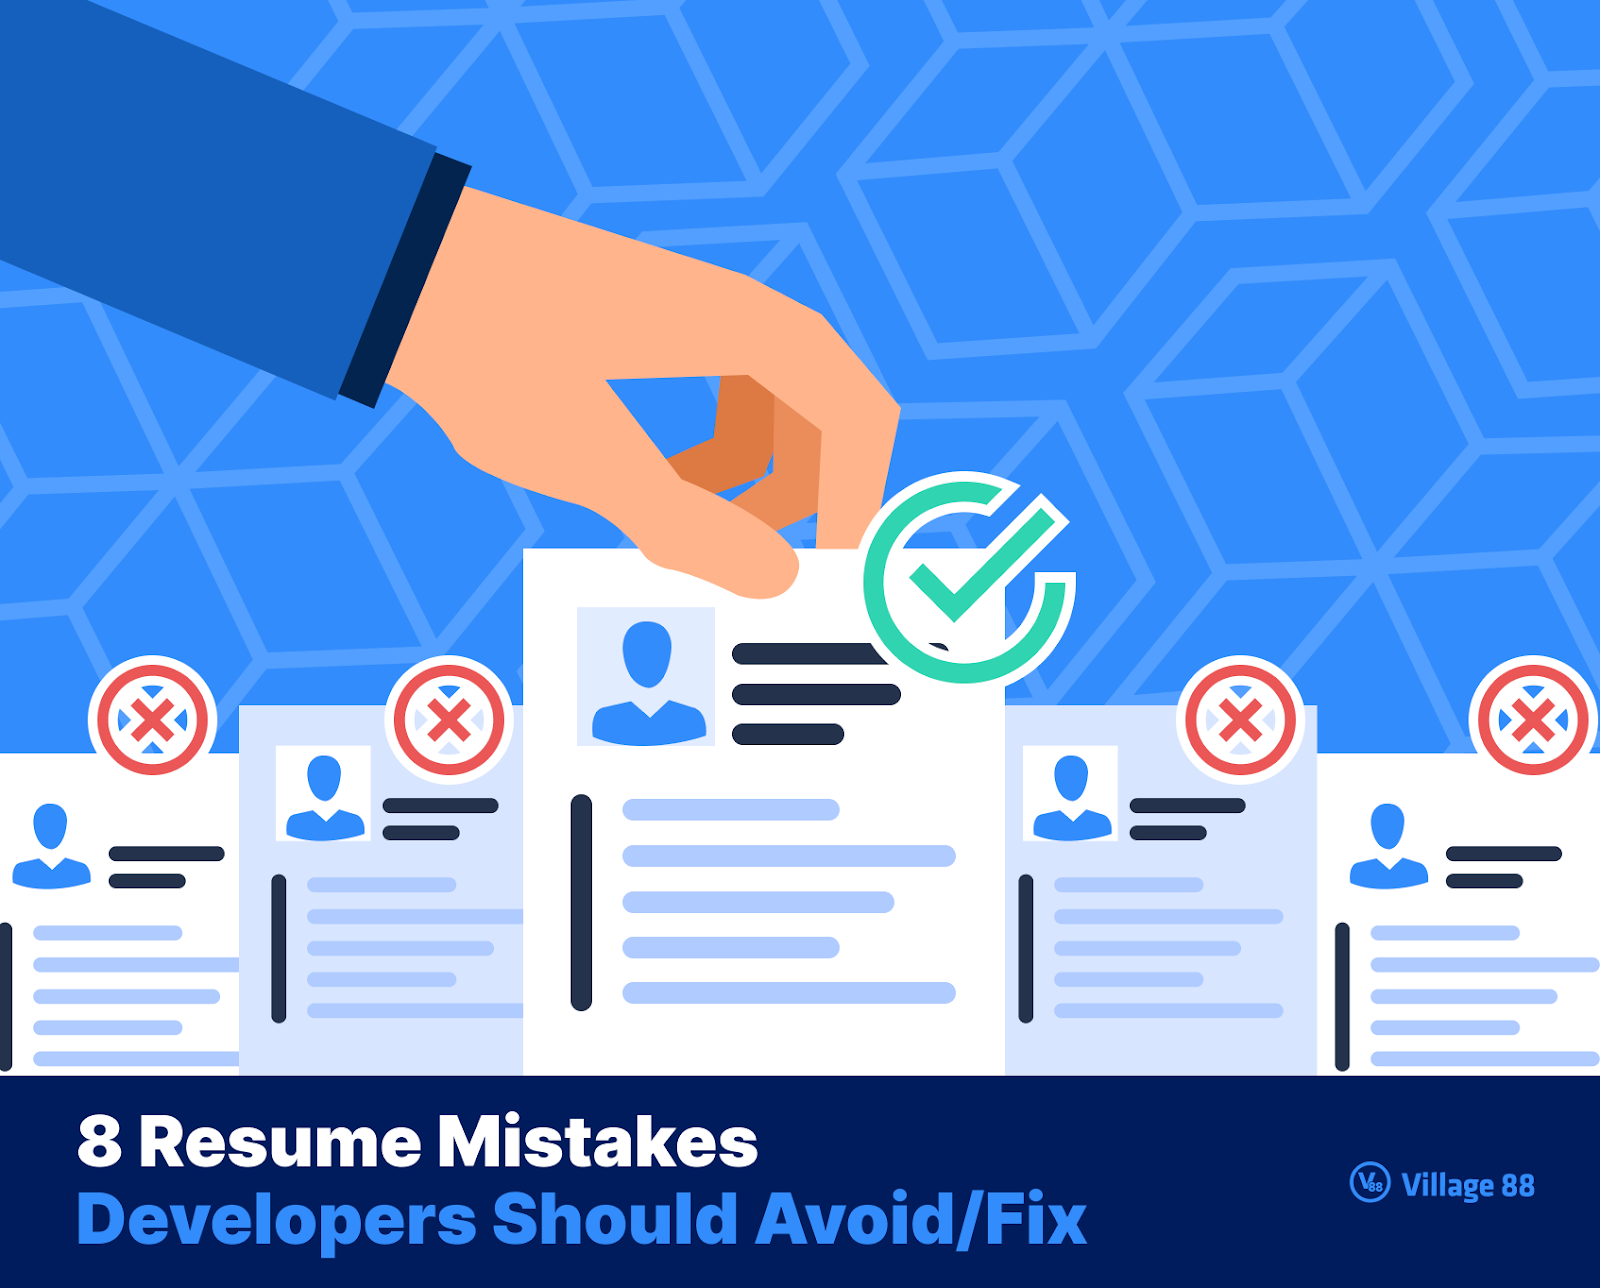 8 Resume Mistakes Developers Should Avoid/Fix